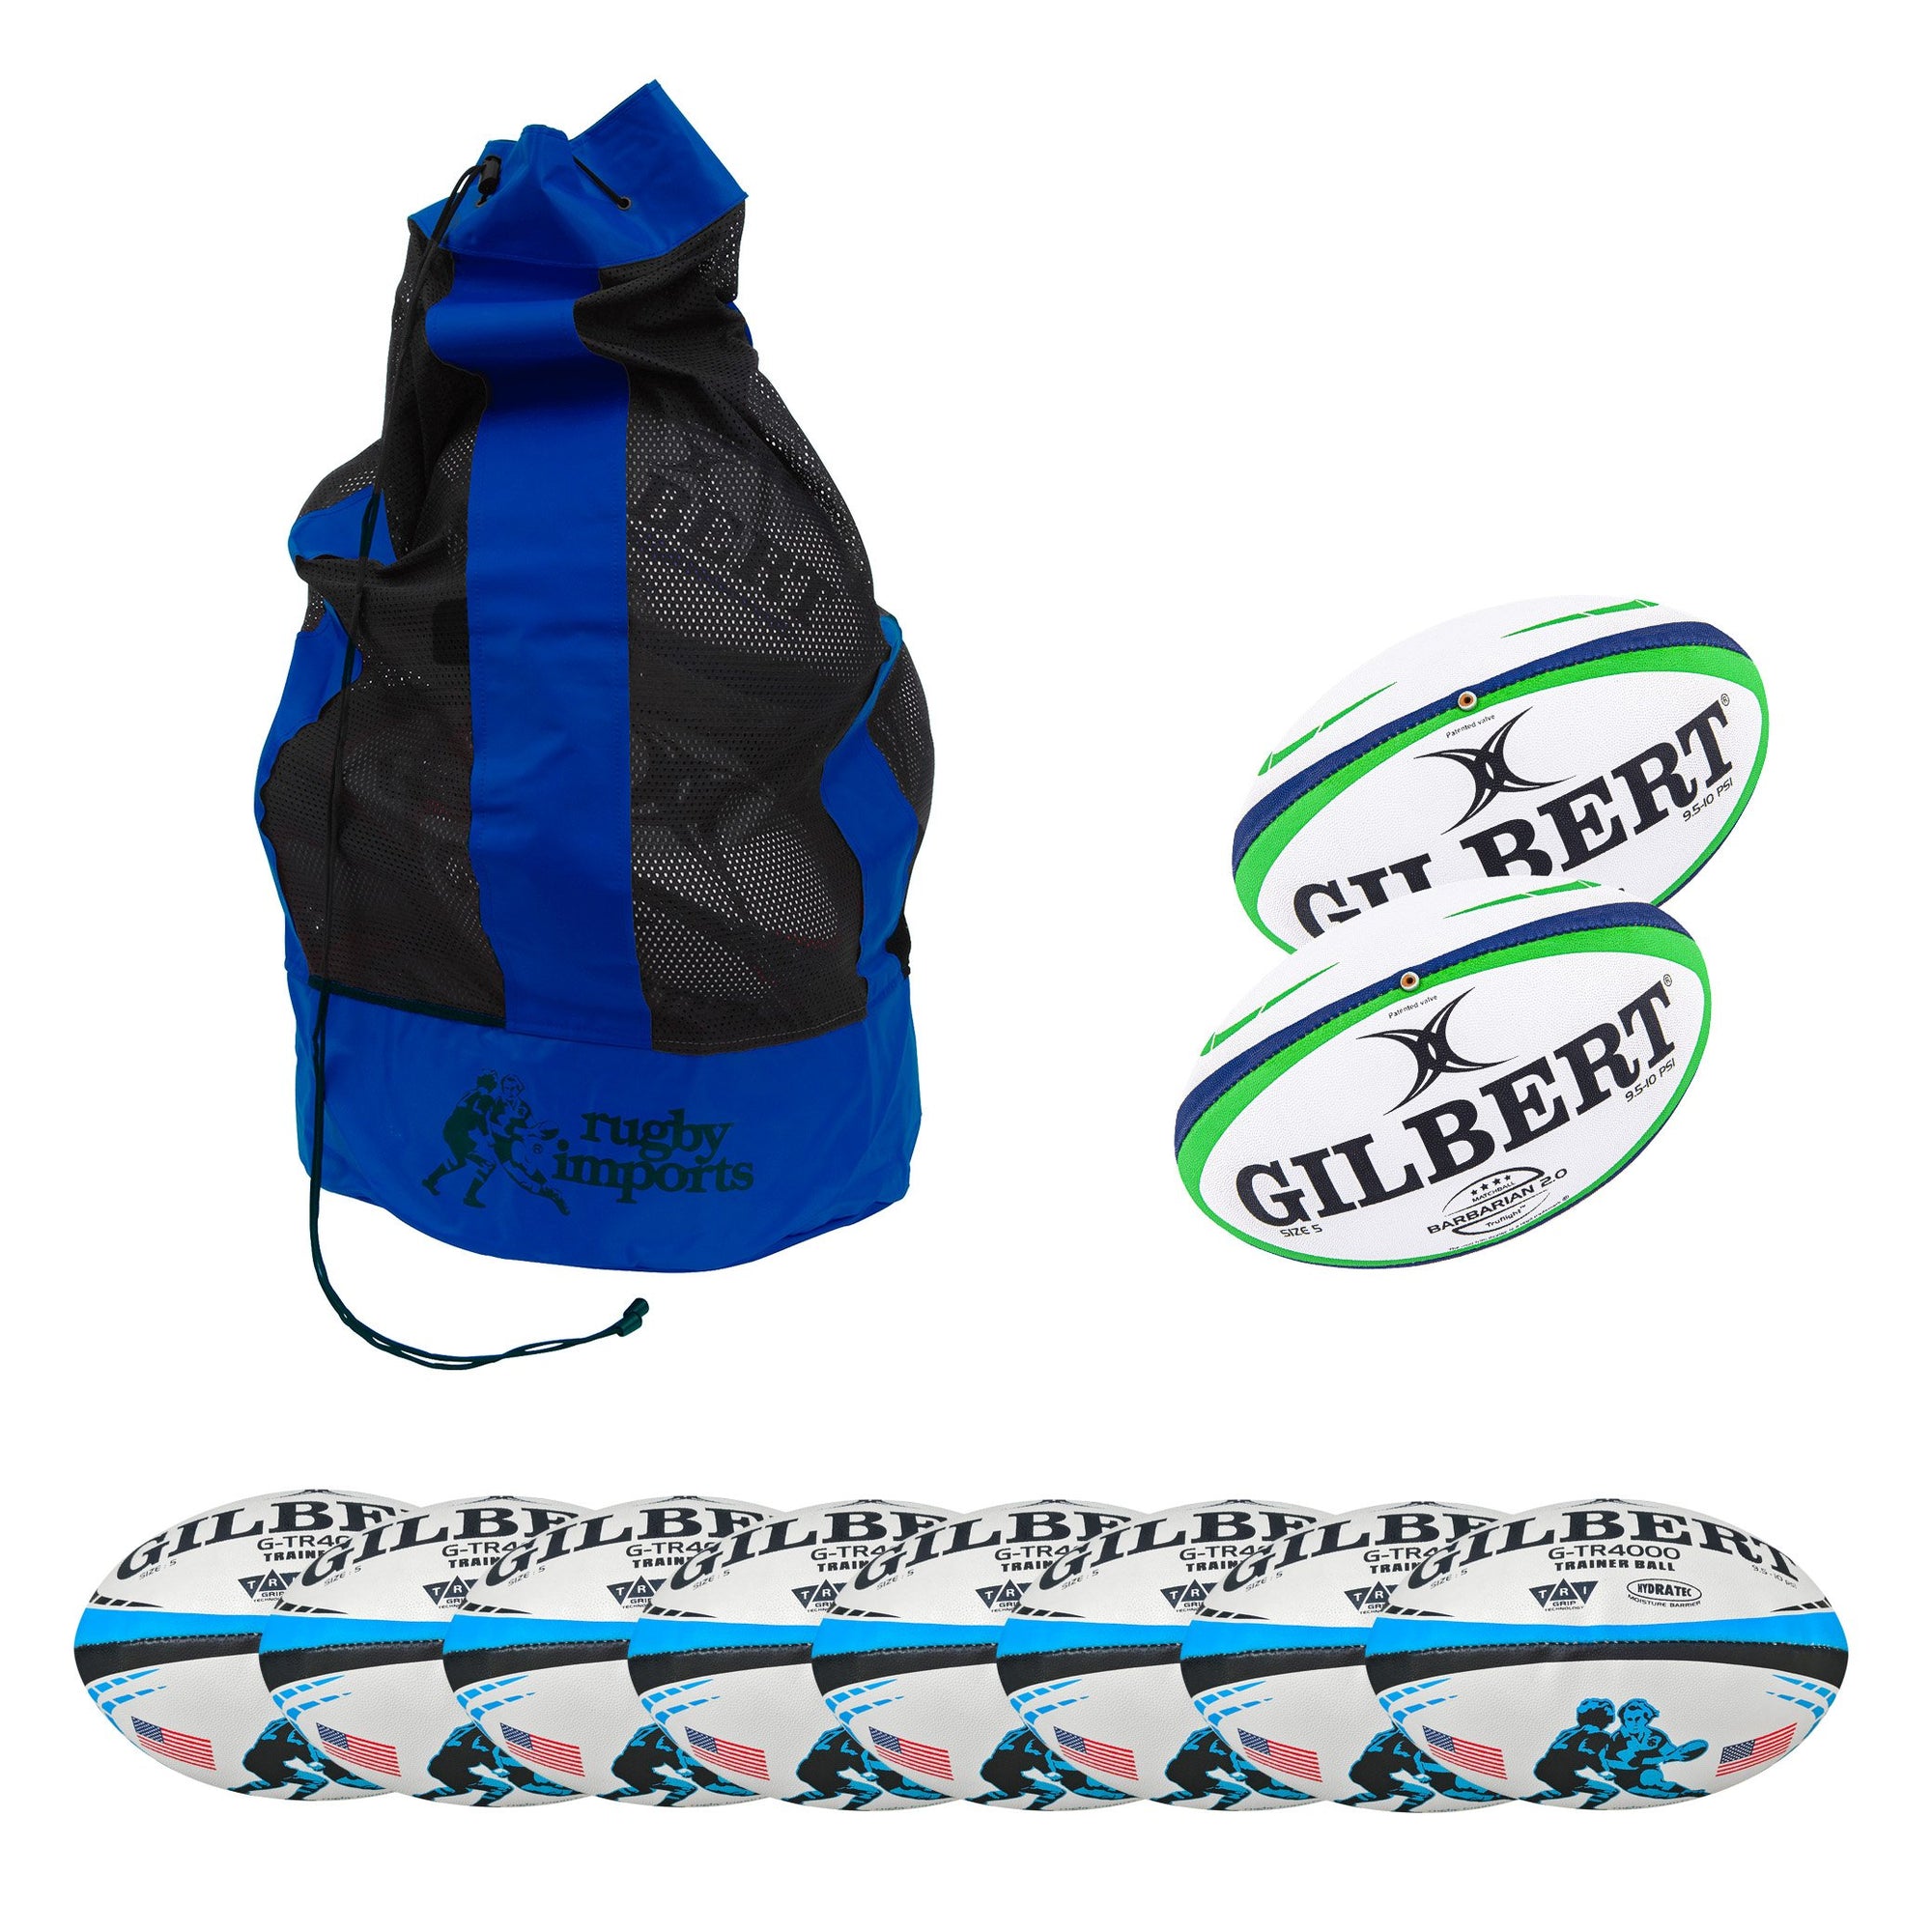 Rugby Imports Premier Level Rugby Ball Pack